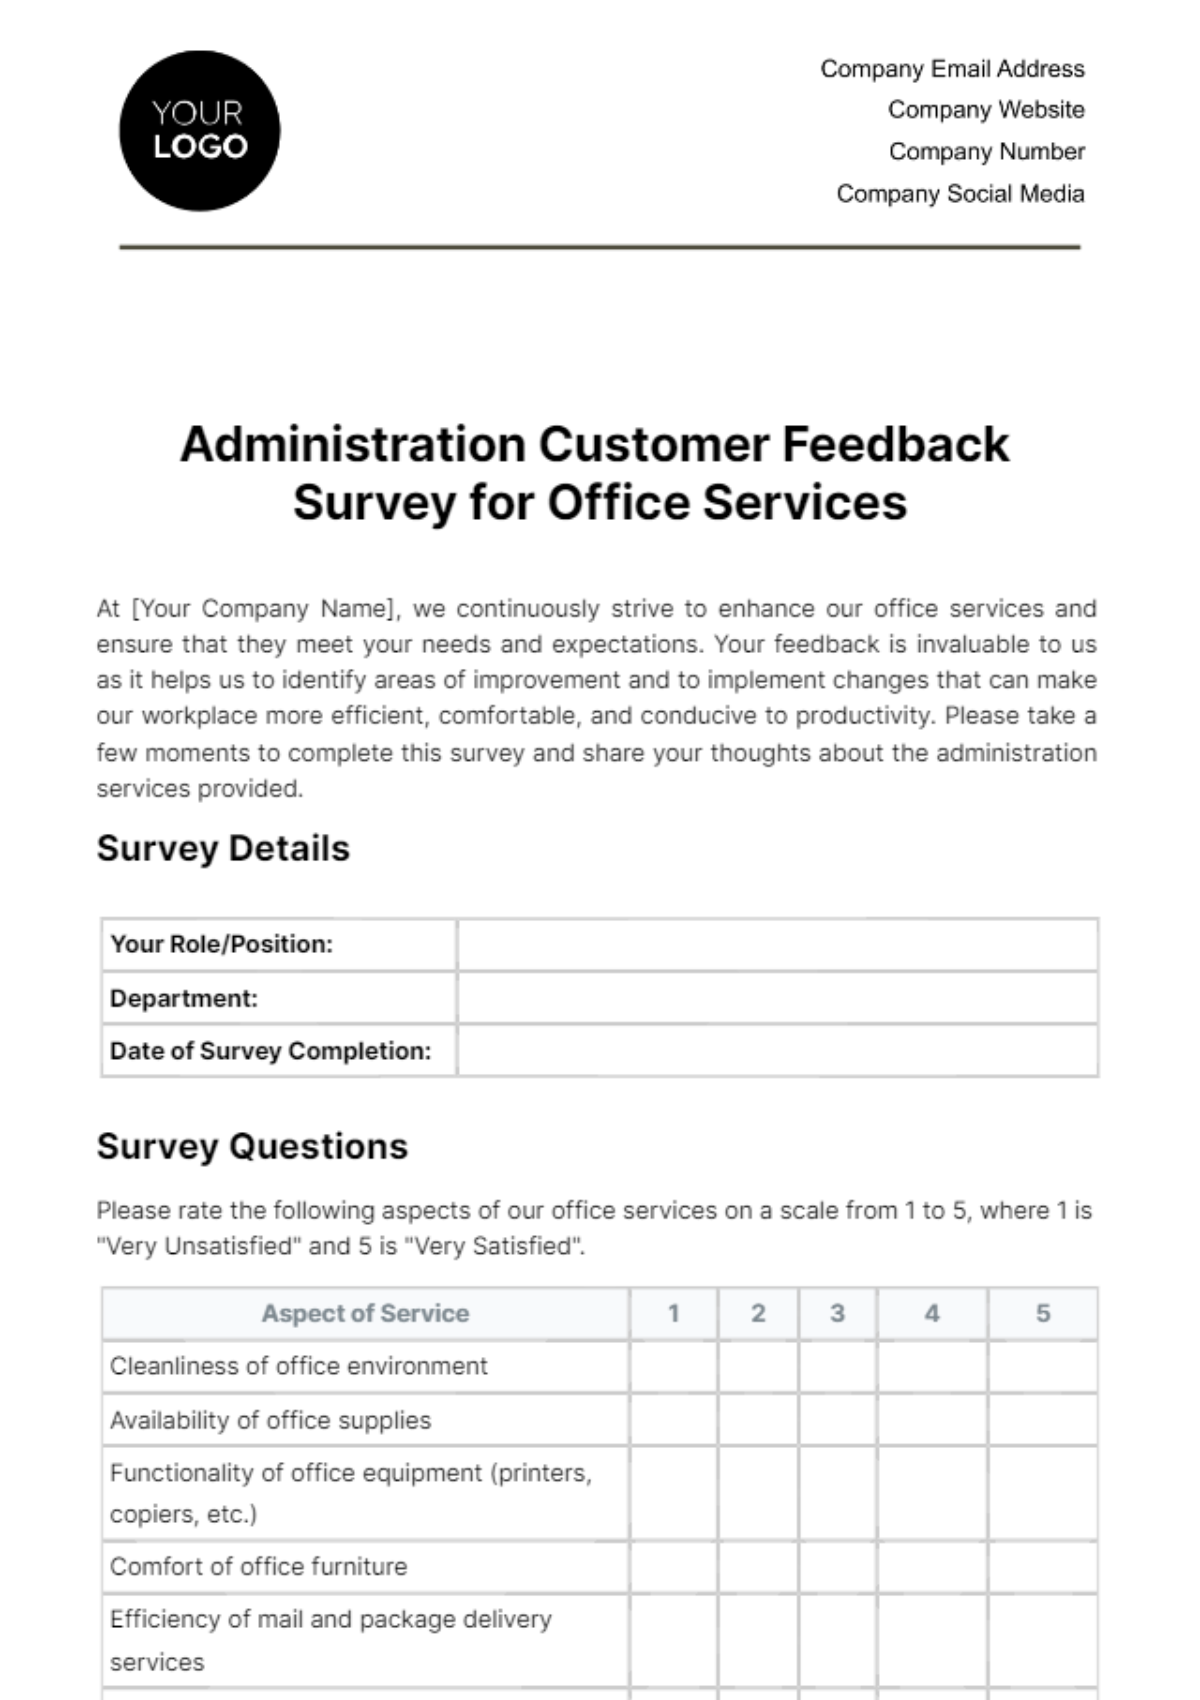 Free Administration Customer Feedback Survey for Office Services Template